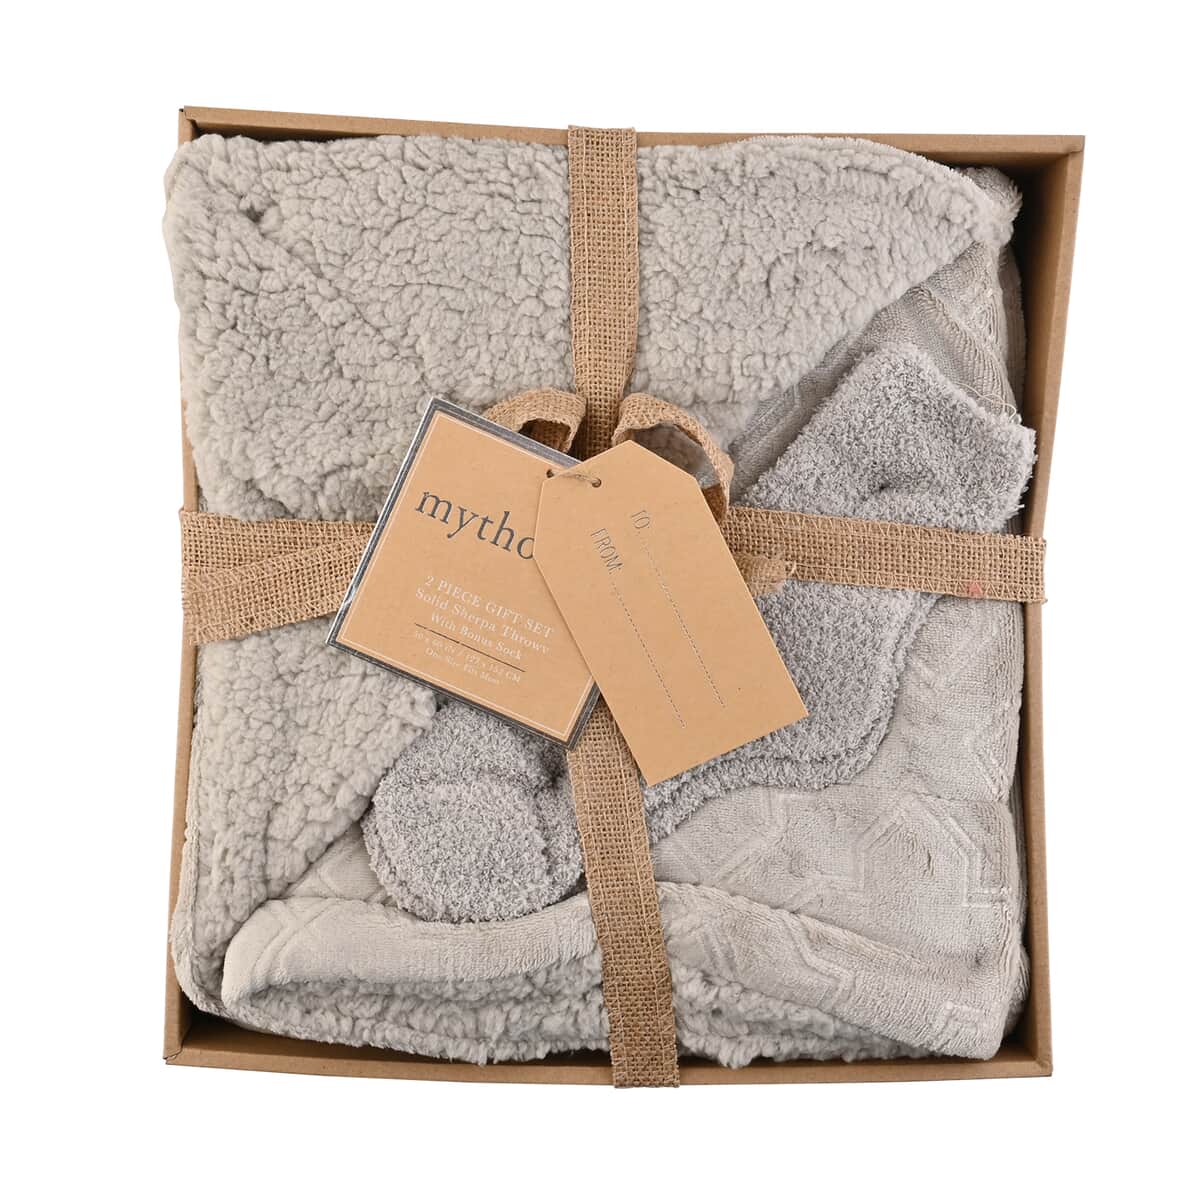 ARDOUR 2pc Gift Set Beige Sherpa Throw with Bonus Socks Set (One Size Fits Most) image number 2